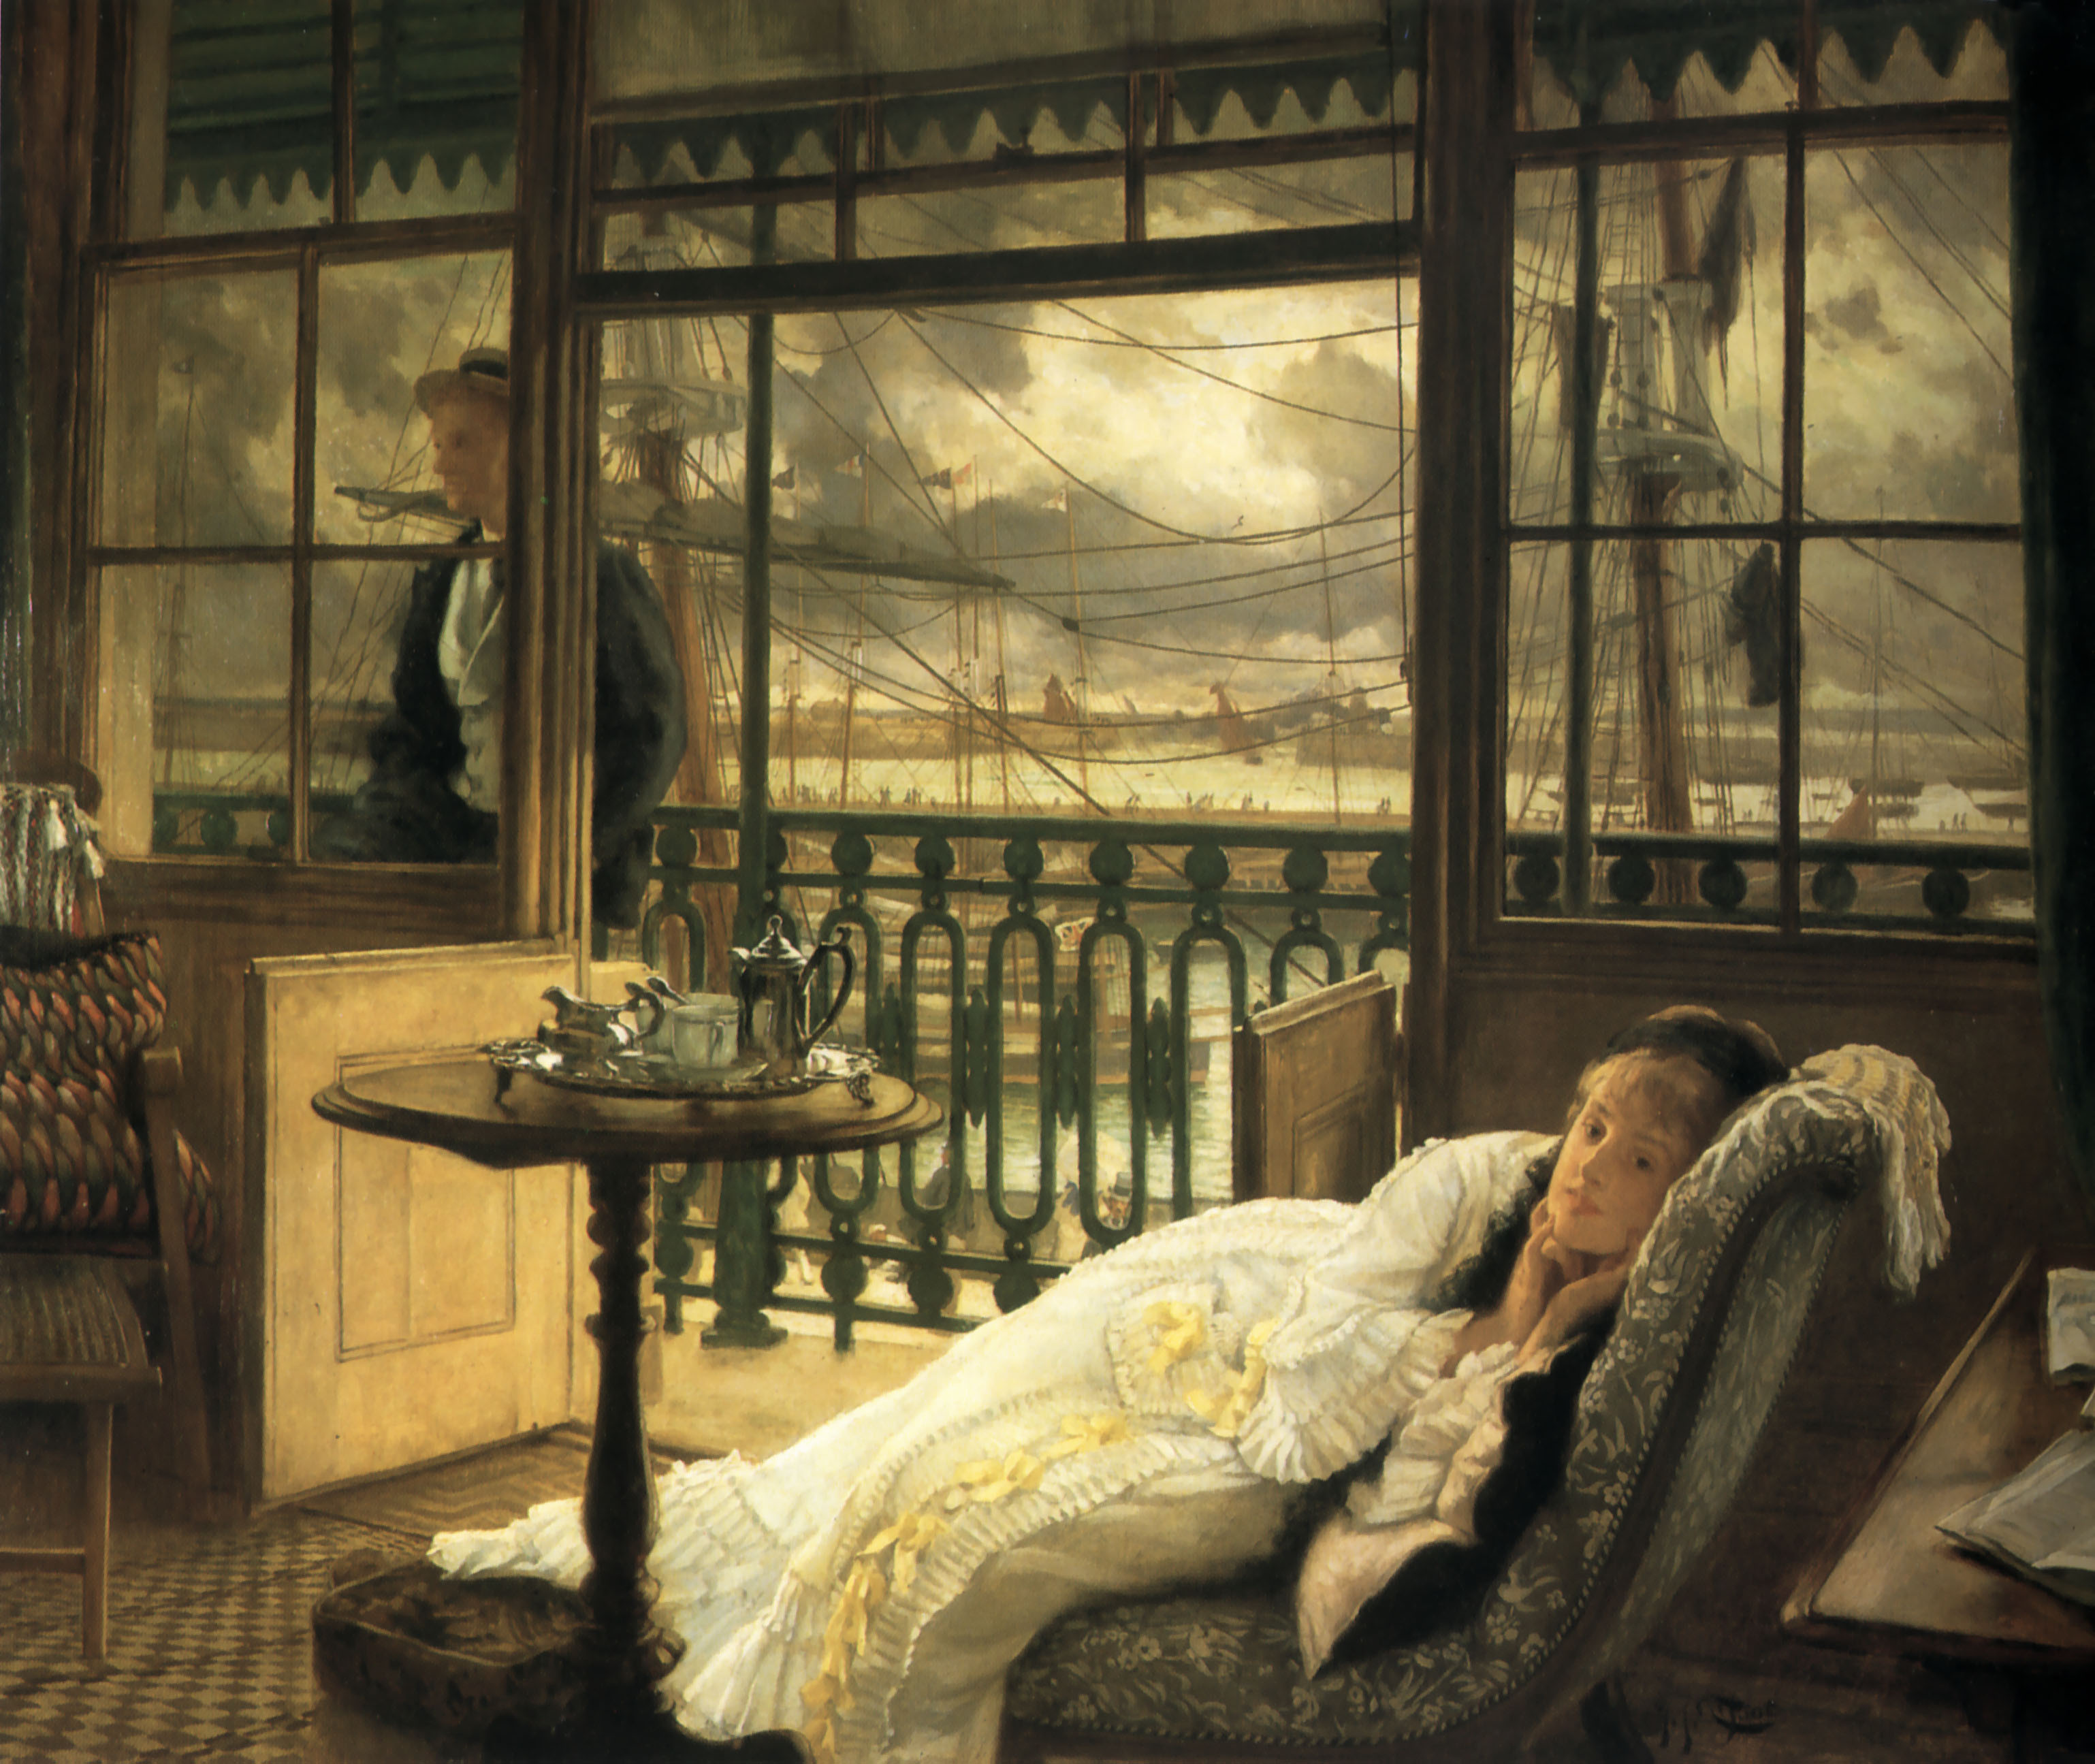 Passing the Storm by James Tissot - 1876 - 76.2 x 101.6 cm Beaverbrook Art Gallery, Fredericton, Canada